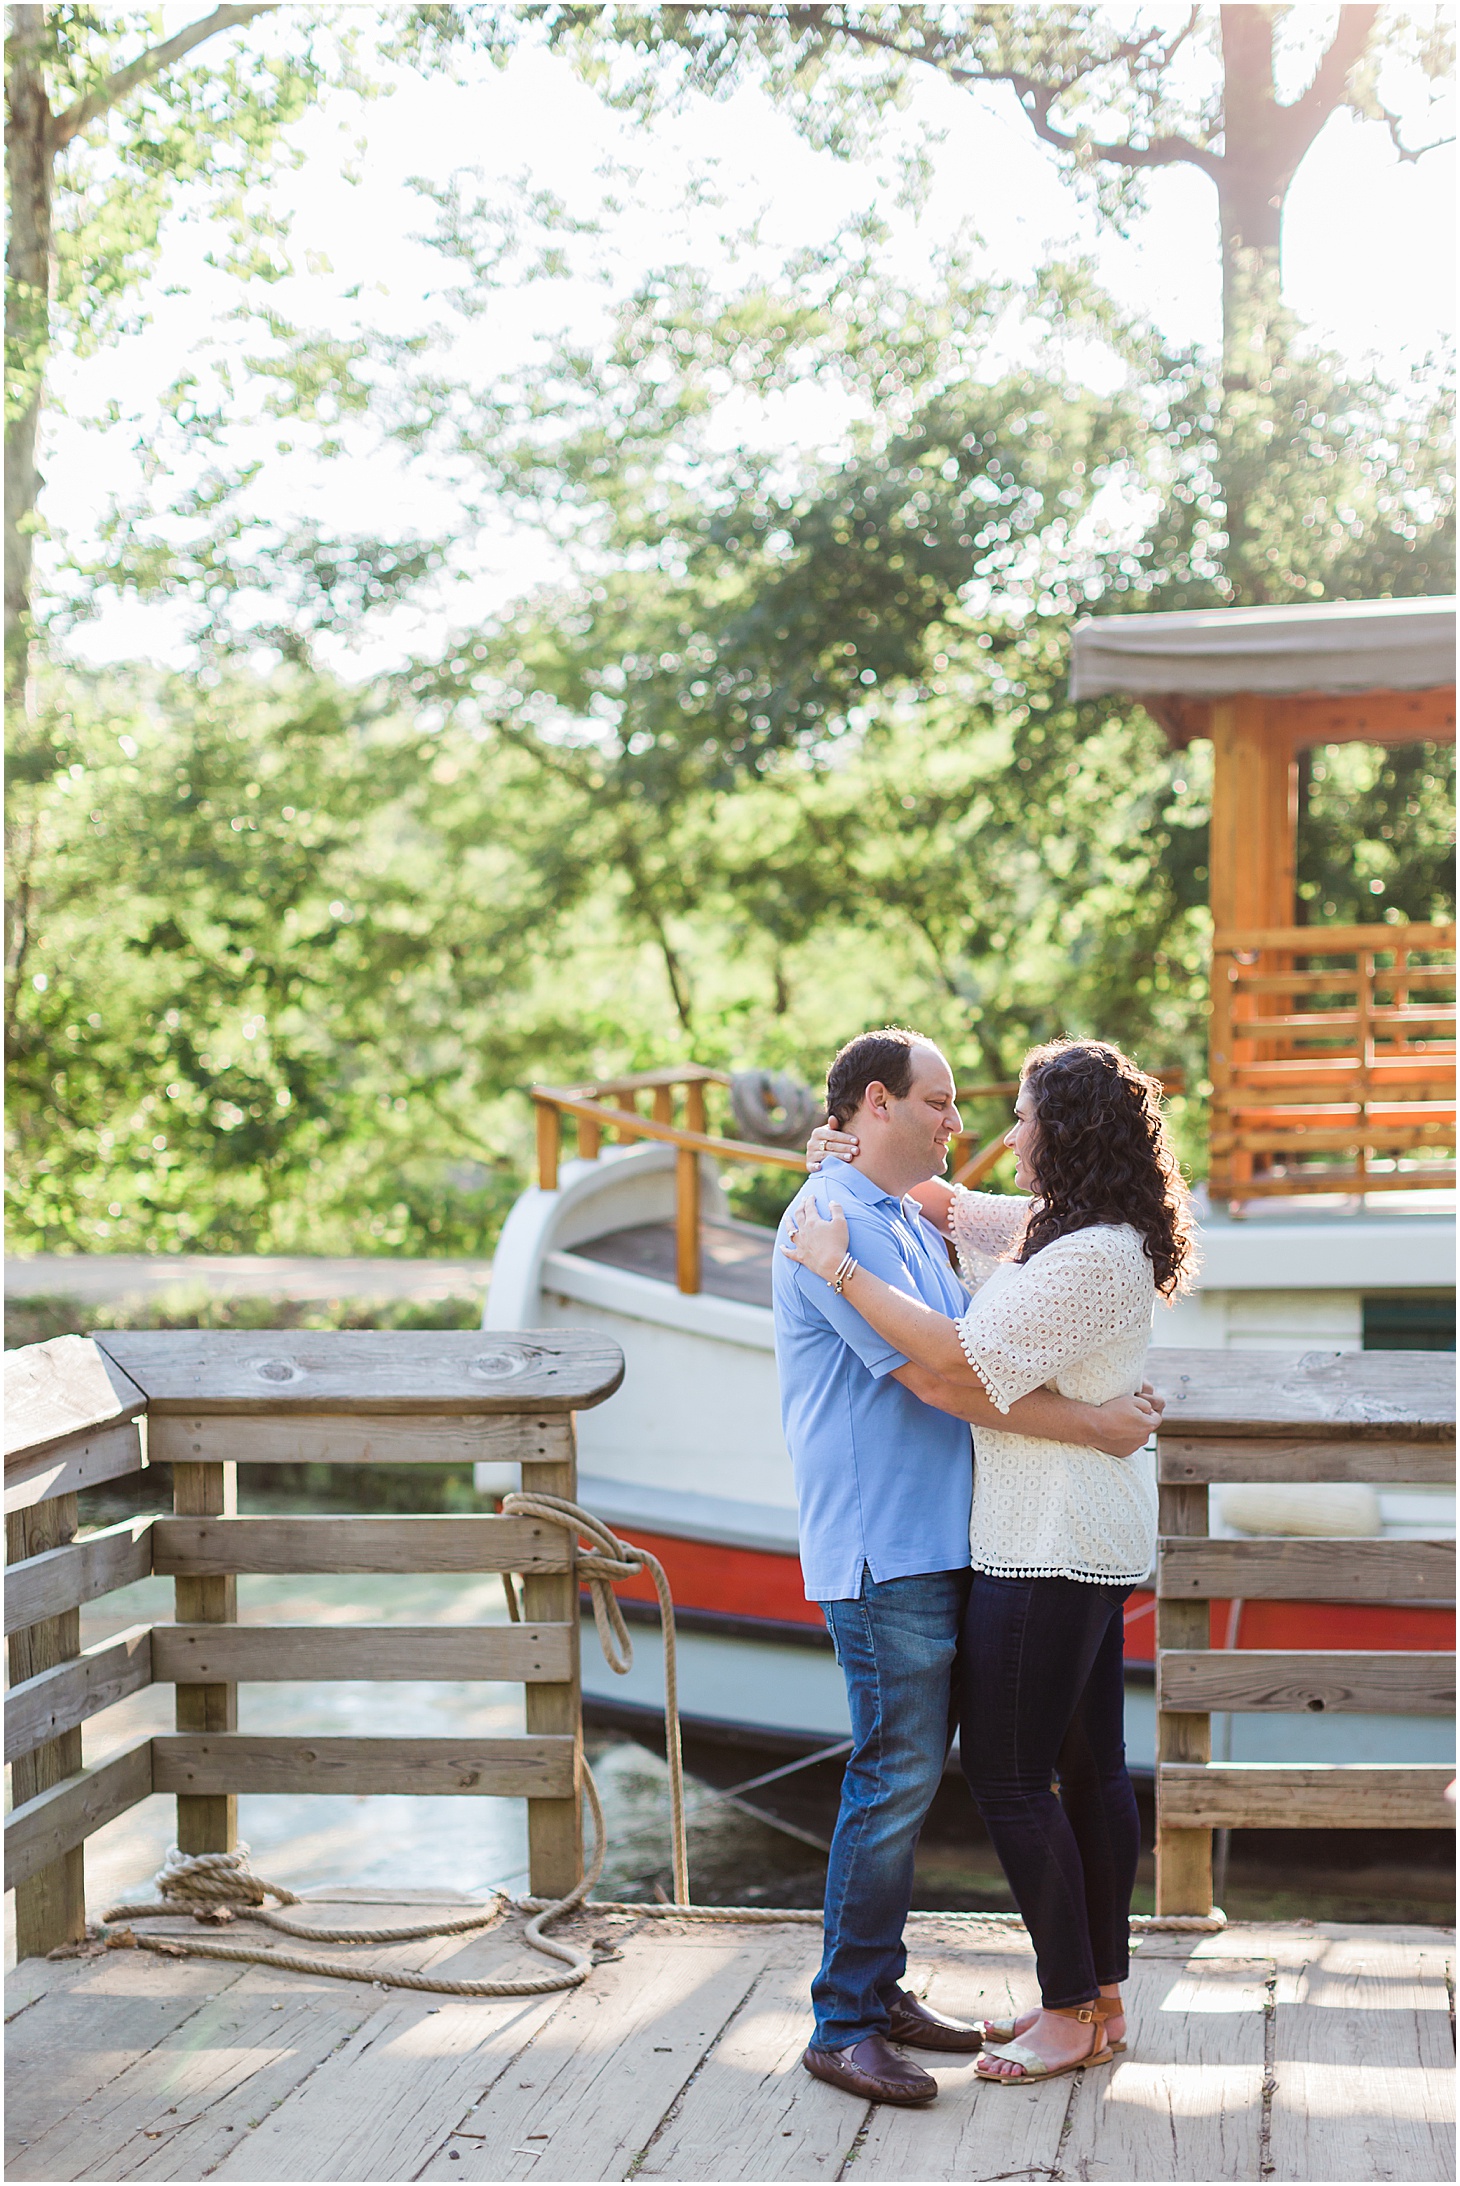 Engagement Session in Potomac, MD, Great Falls Tavern Engagement Session, Sarah Bradshaw Photography, DC Wedding Photographer